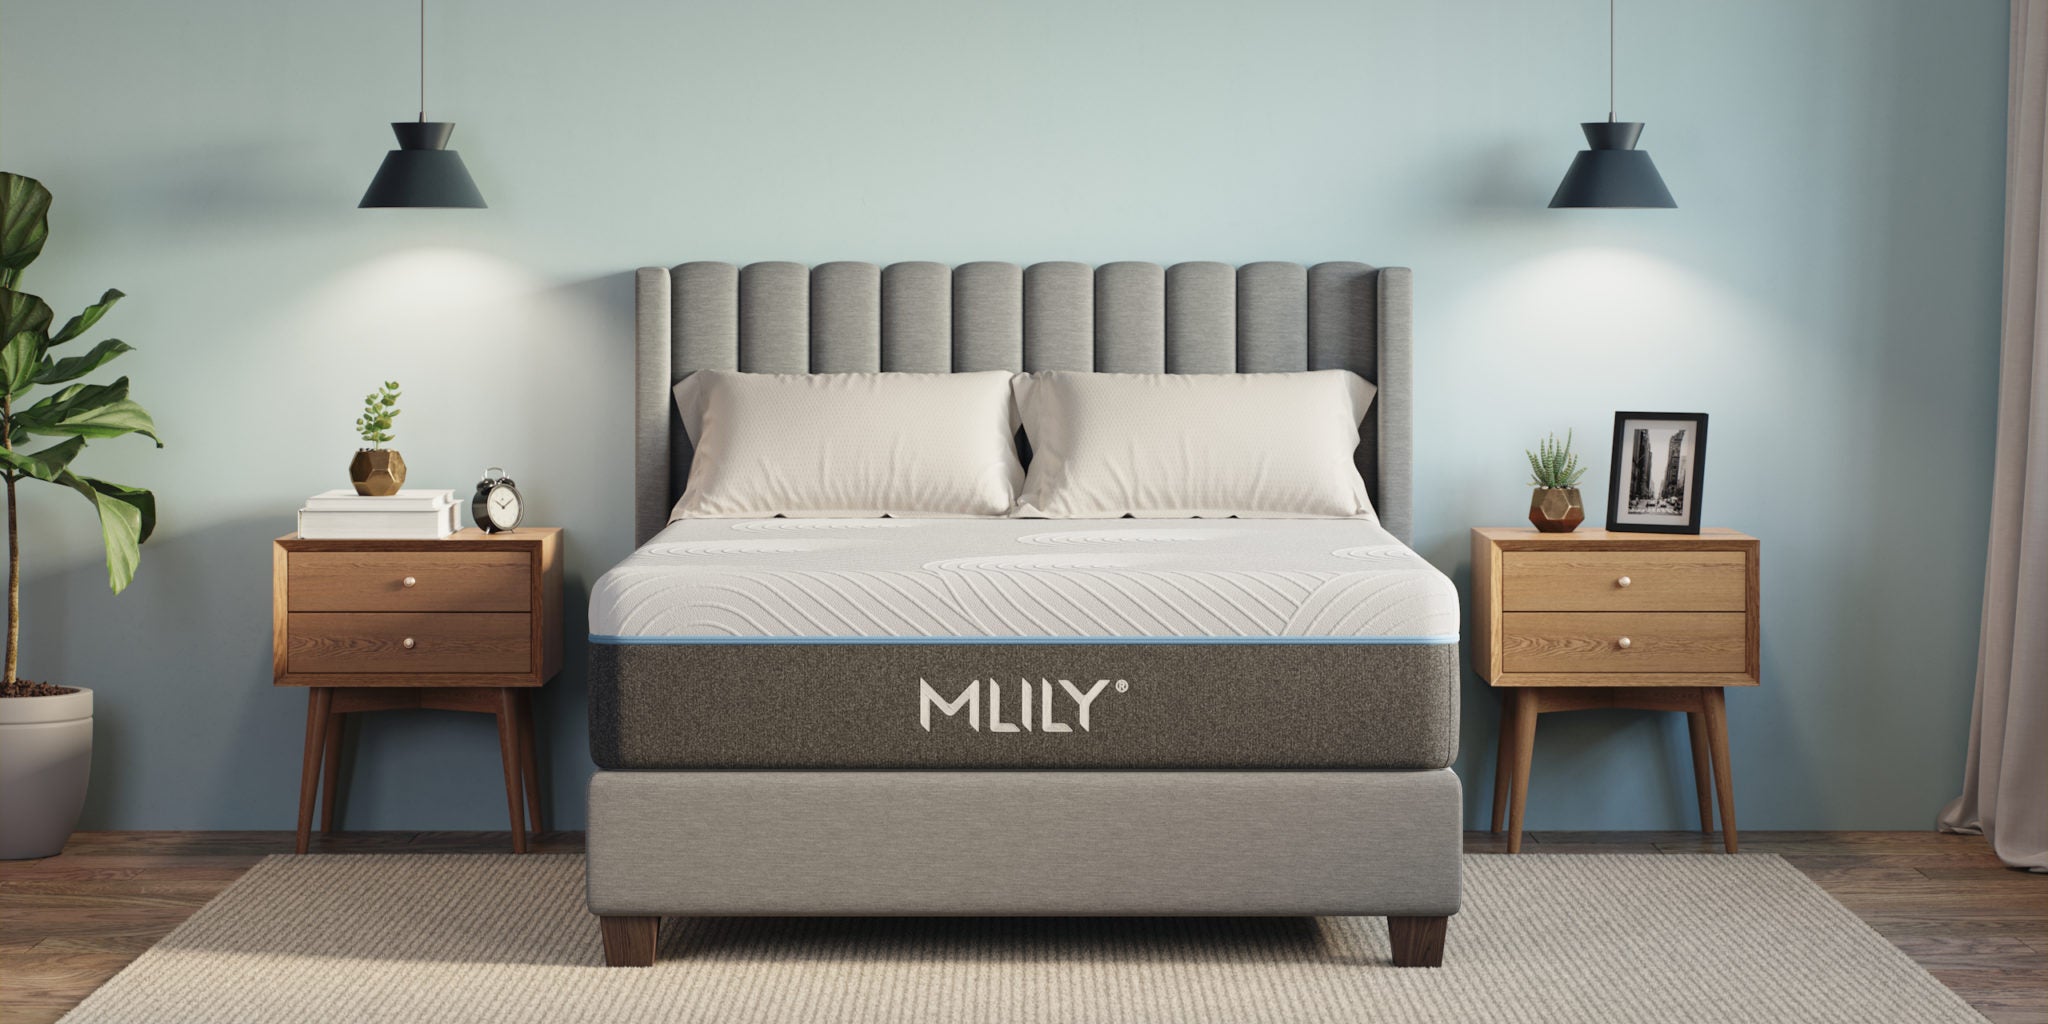 Image of Mlily Fusion Luxe 12.5" Hybrid Mattress